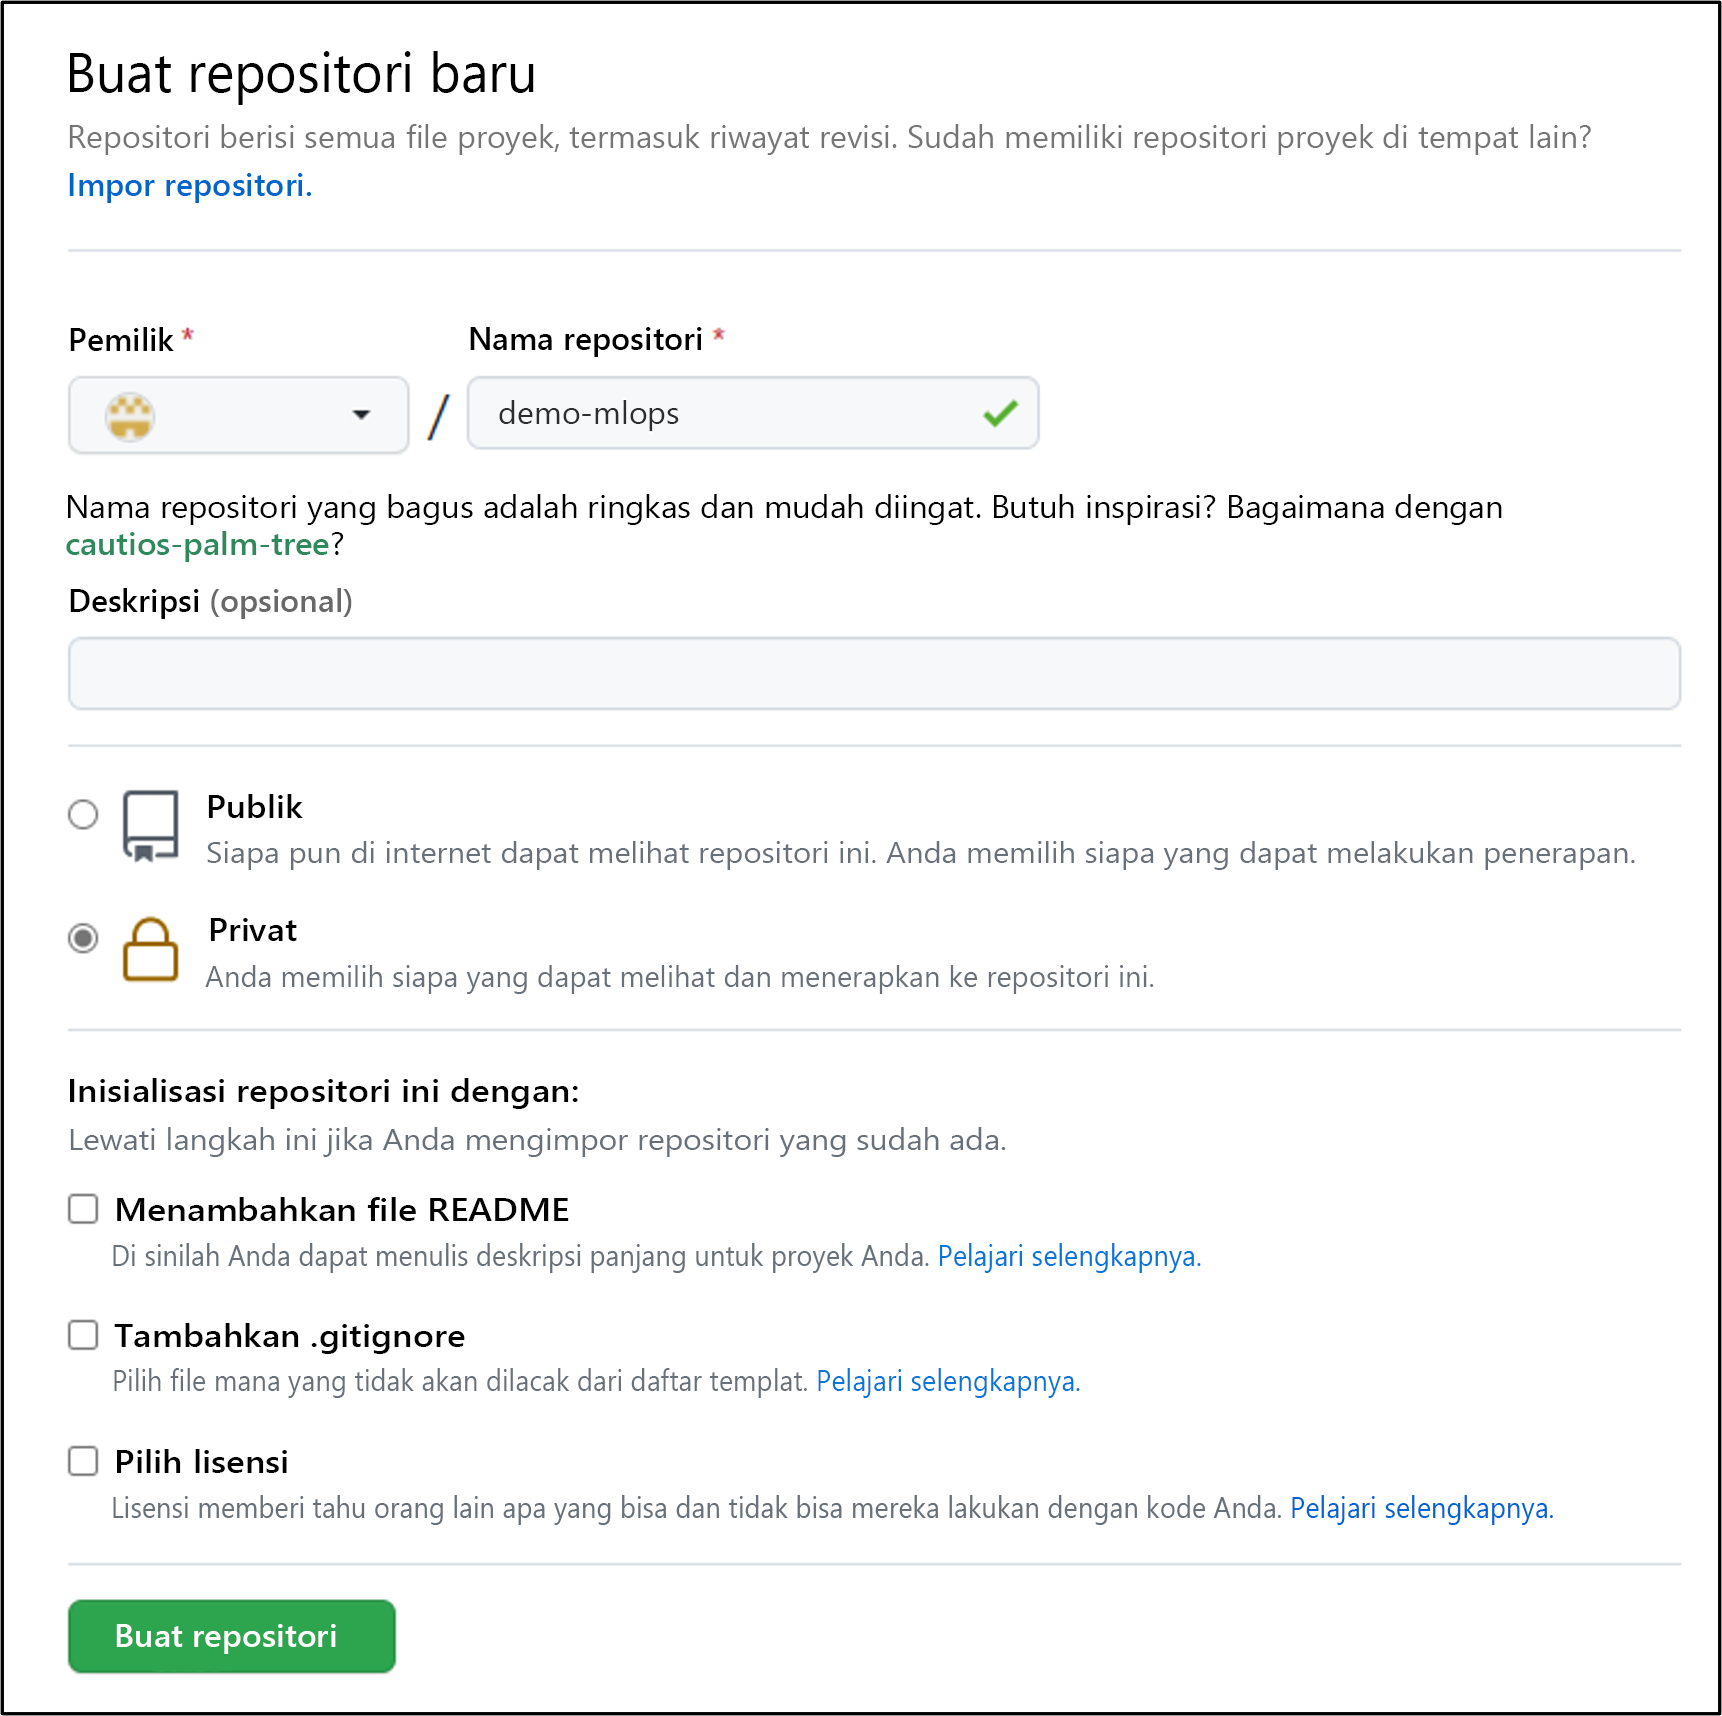 New repo in GitHub